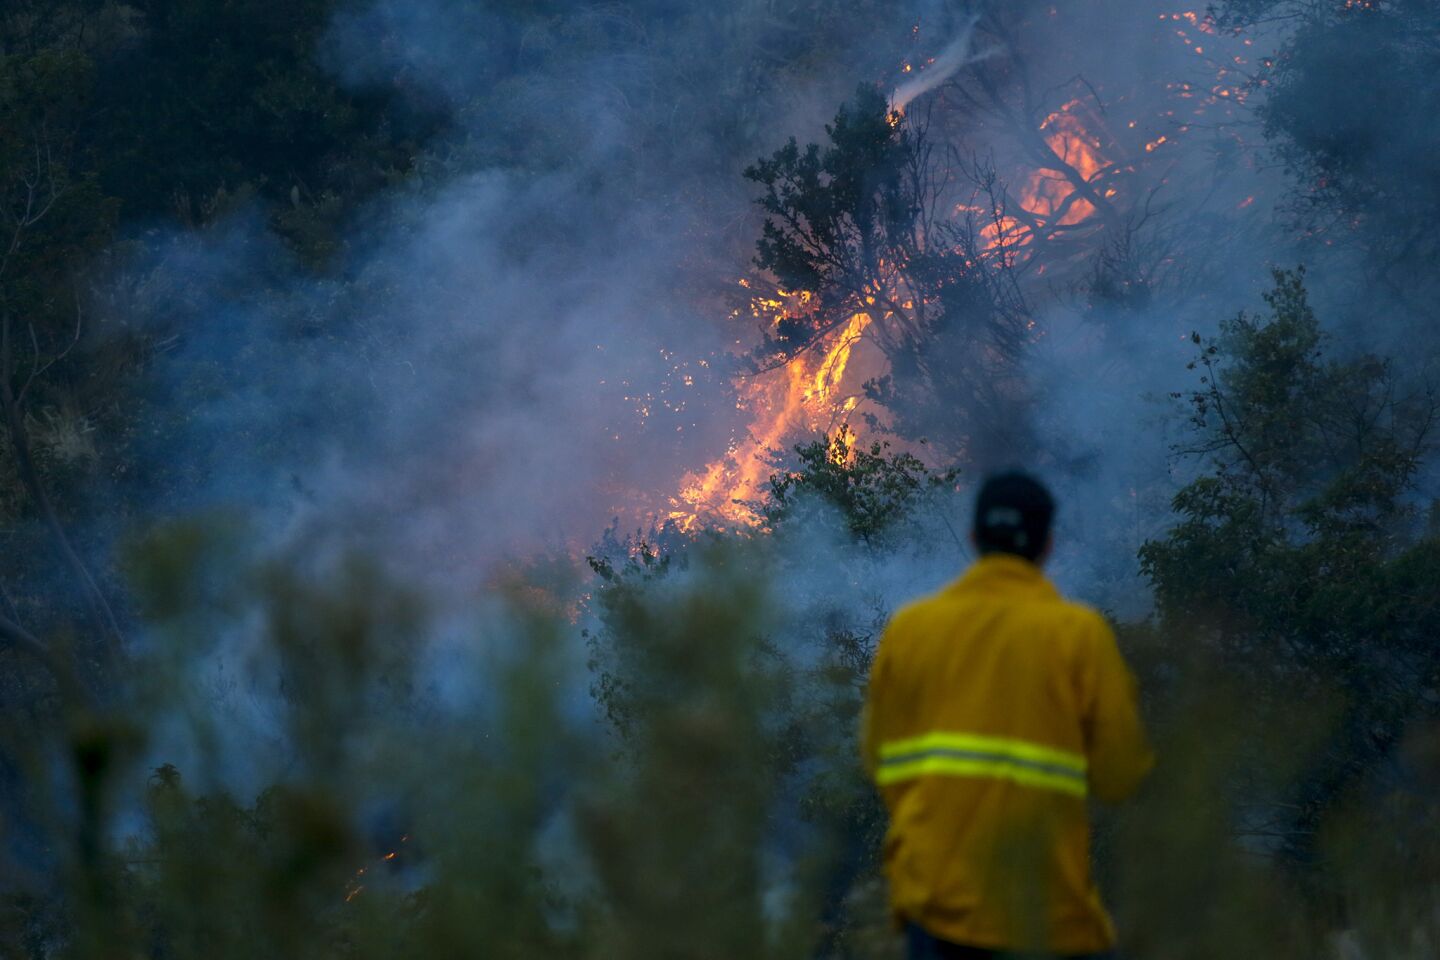 Firefighters keep an eye on the flames on a hillside in Duarte as the fast-moving Fish fire continues to burn Tuesday morning.